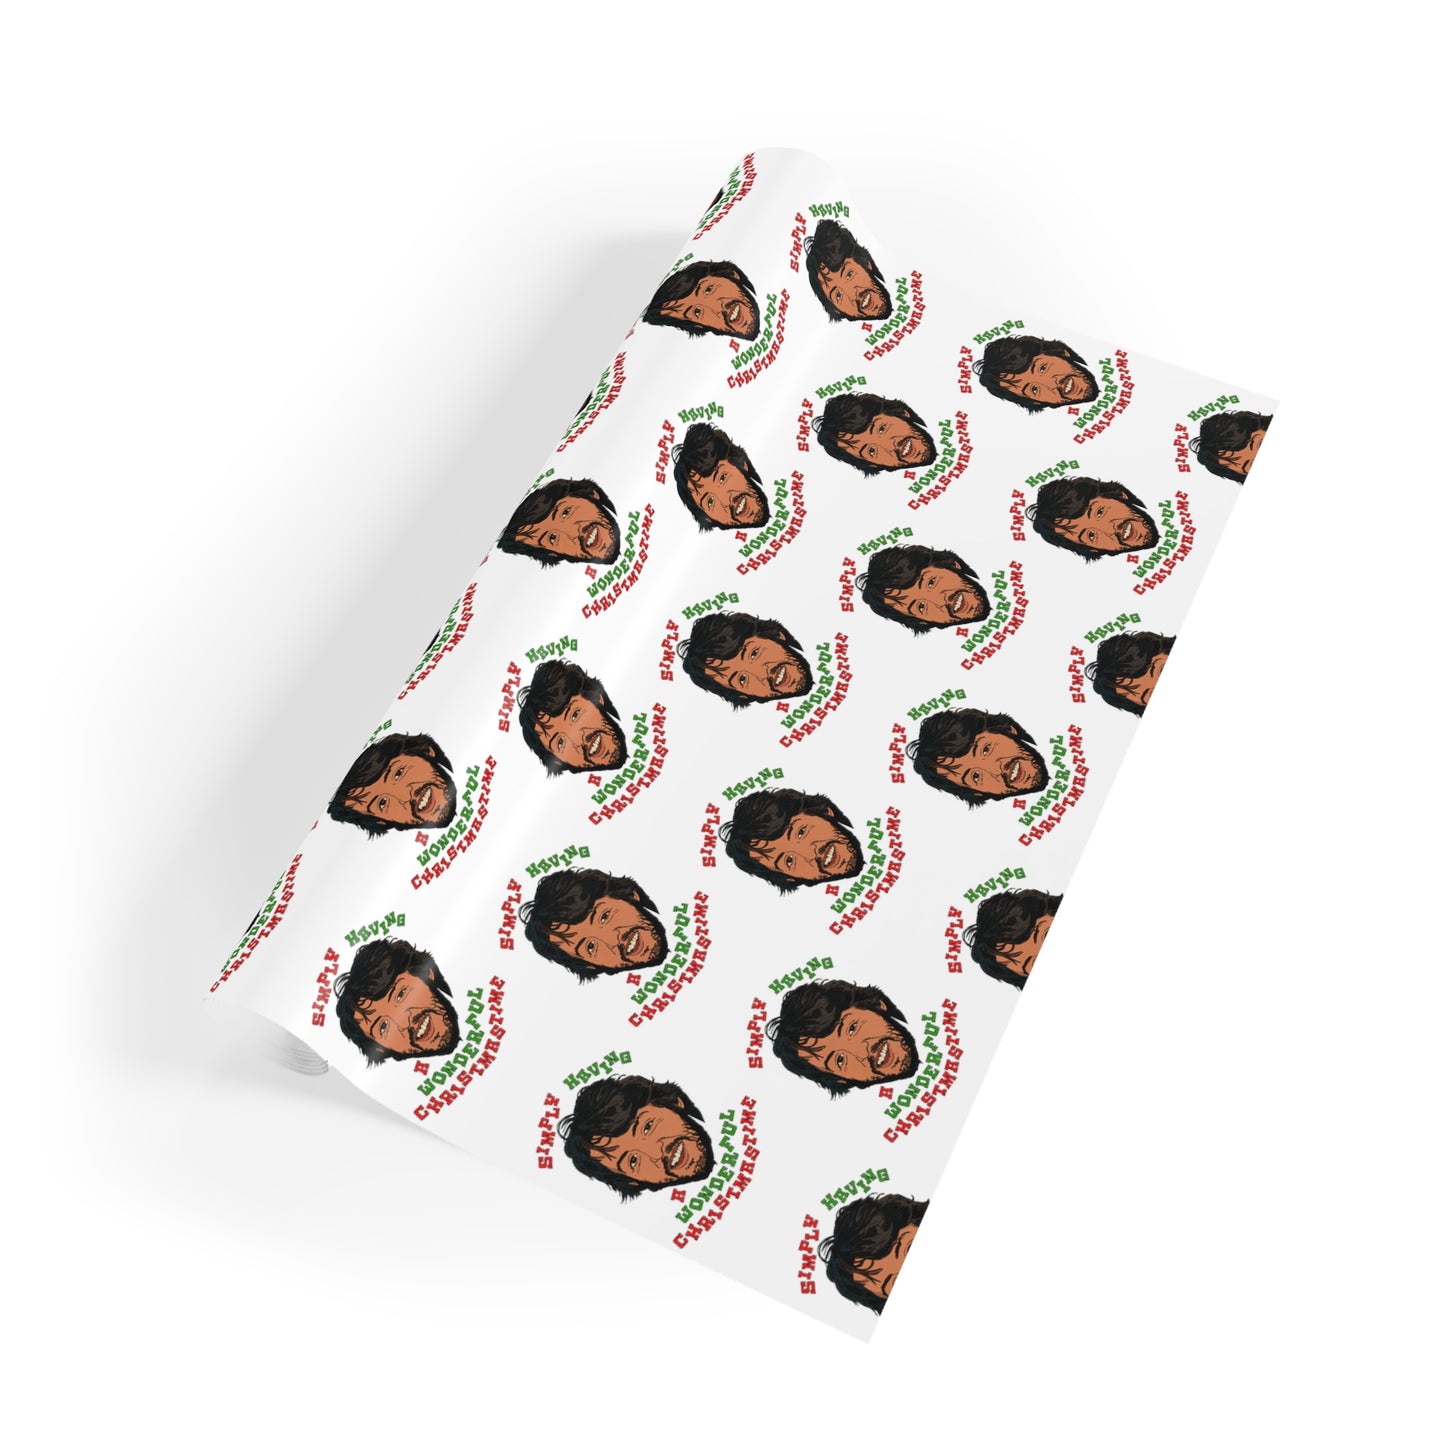 Paul McCartney- Wonderful Christmastime- Christmas- Gift Wrapping Paper Rolls, 1pc